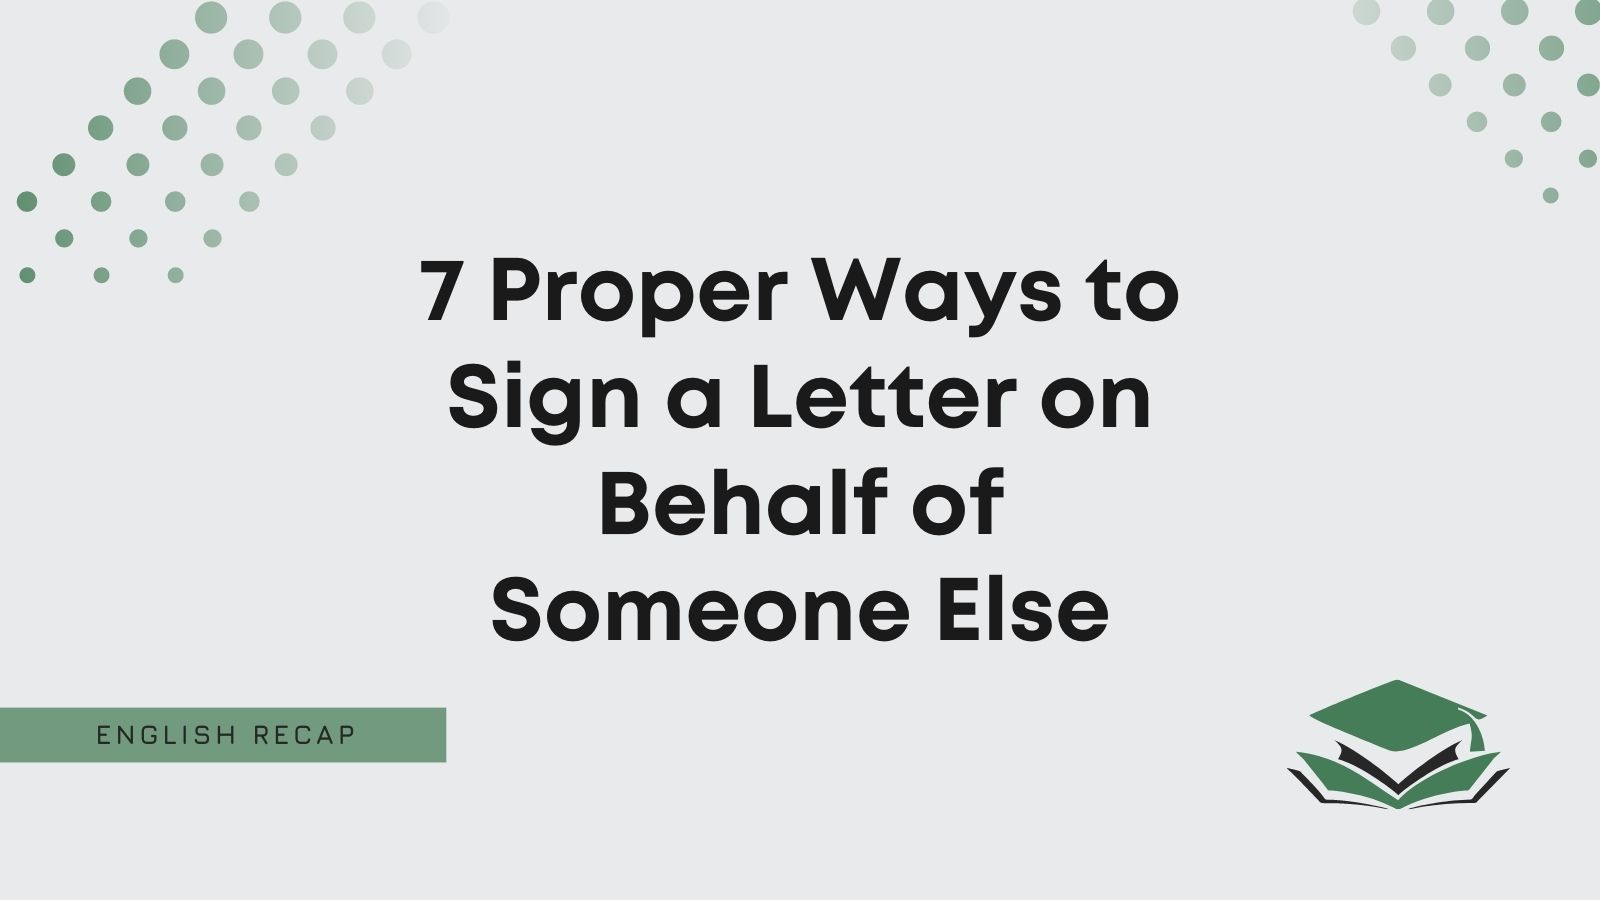 7 Proper Ways to Sign a Letter on Behalf of Someone Else - English Recap